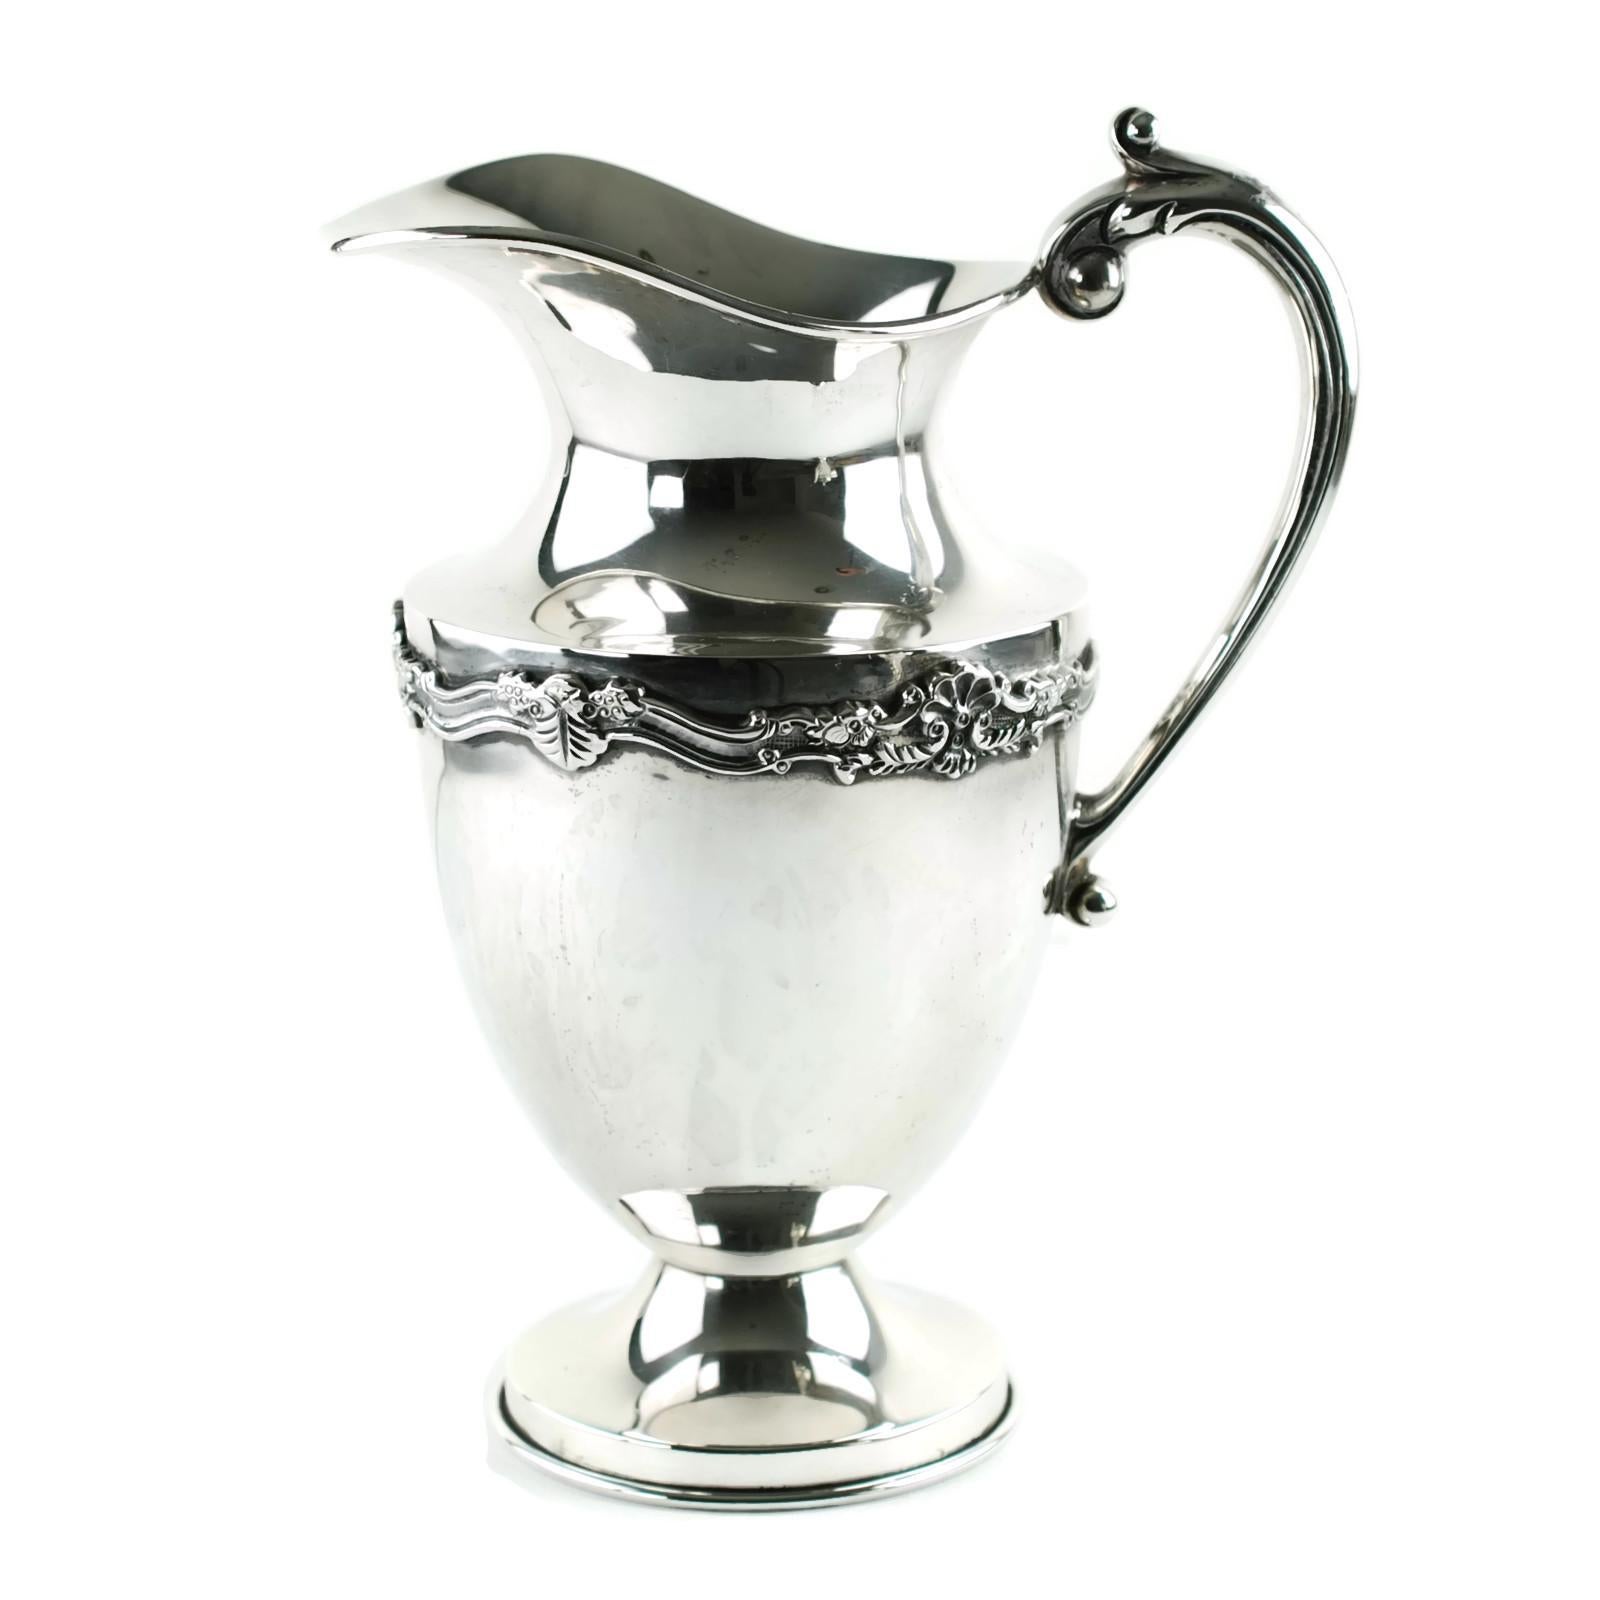 This substantial sterling silver tea set was made by highly regarded Mexico City silversmith Gonzalo W. Moreno. Moreno's taller produced lines of hollowware and jewelry, some of which was retailed by Cartier. This elegant signed Moreno set is